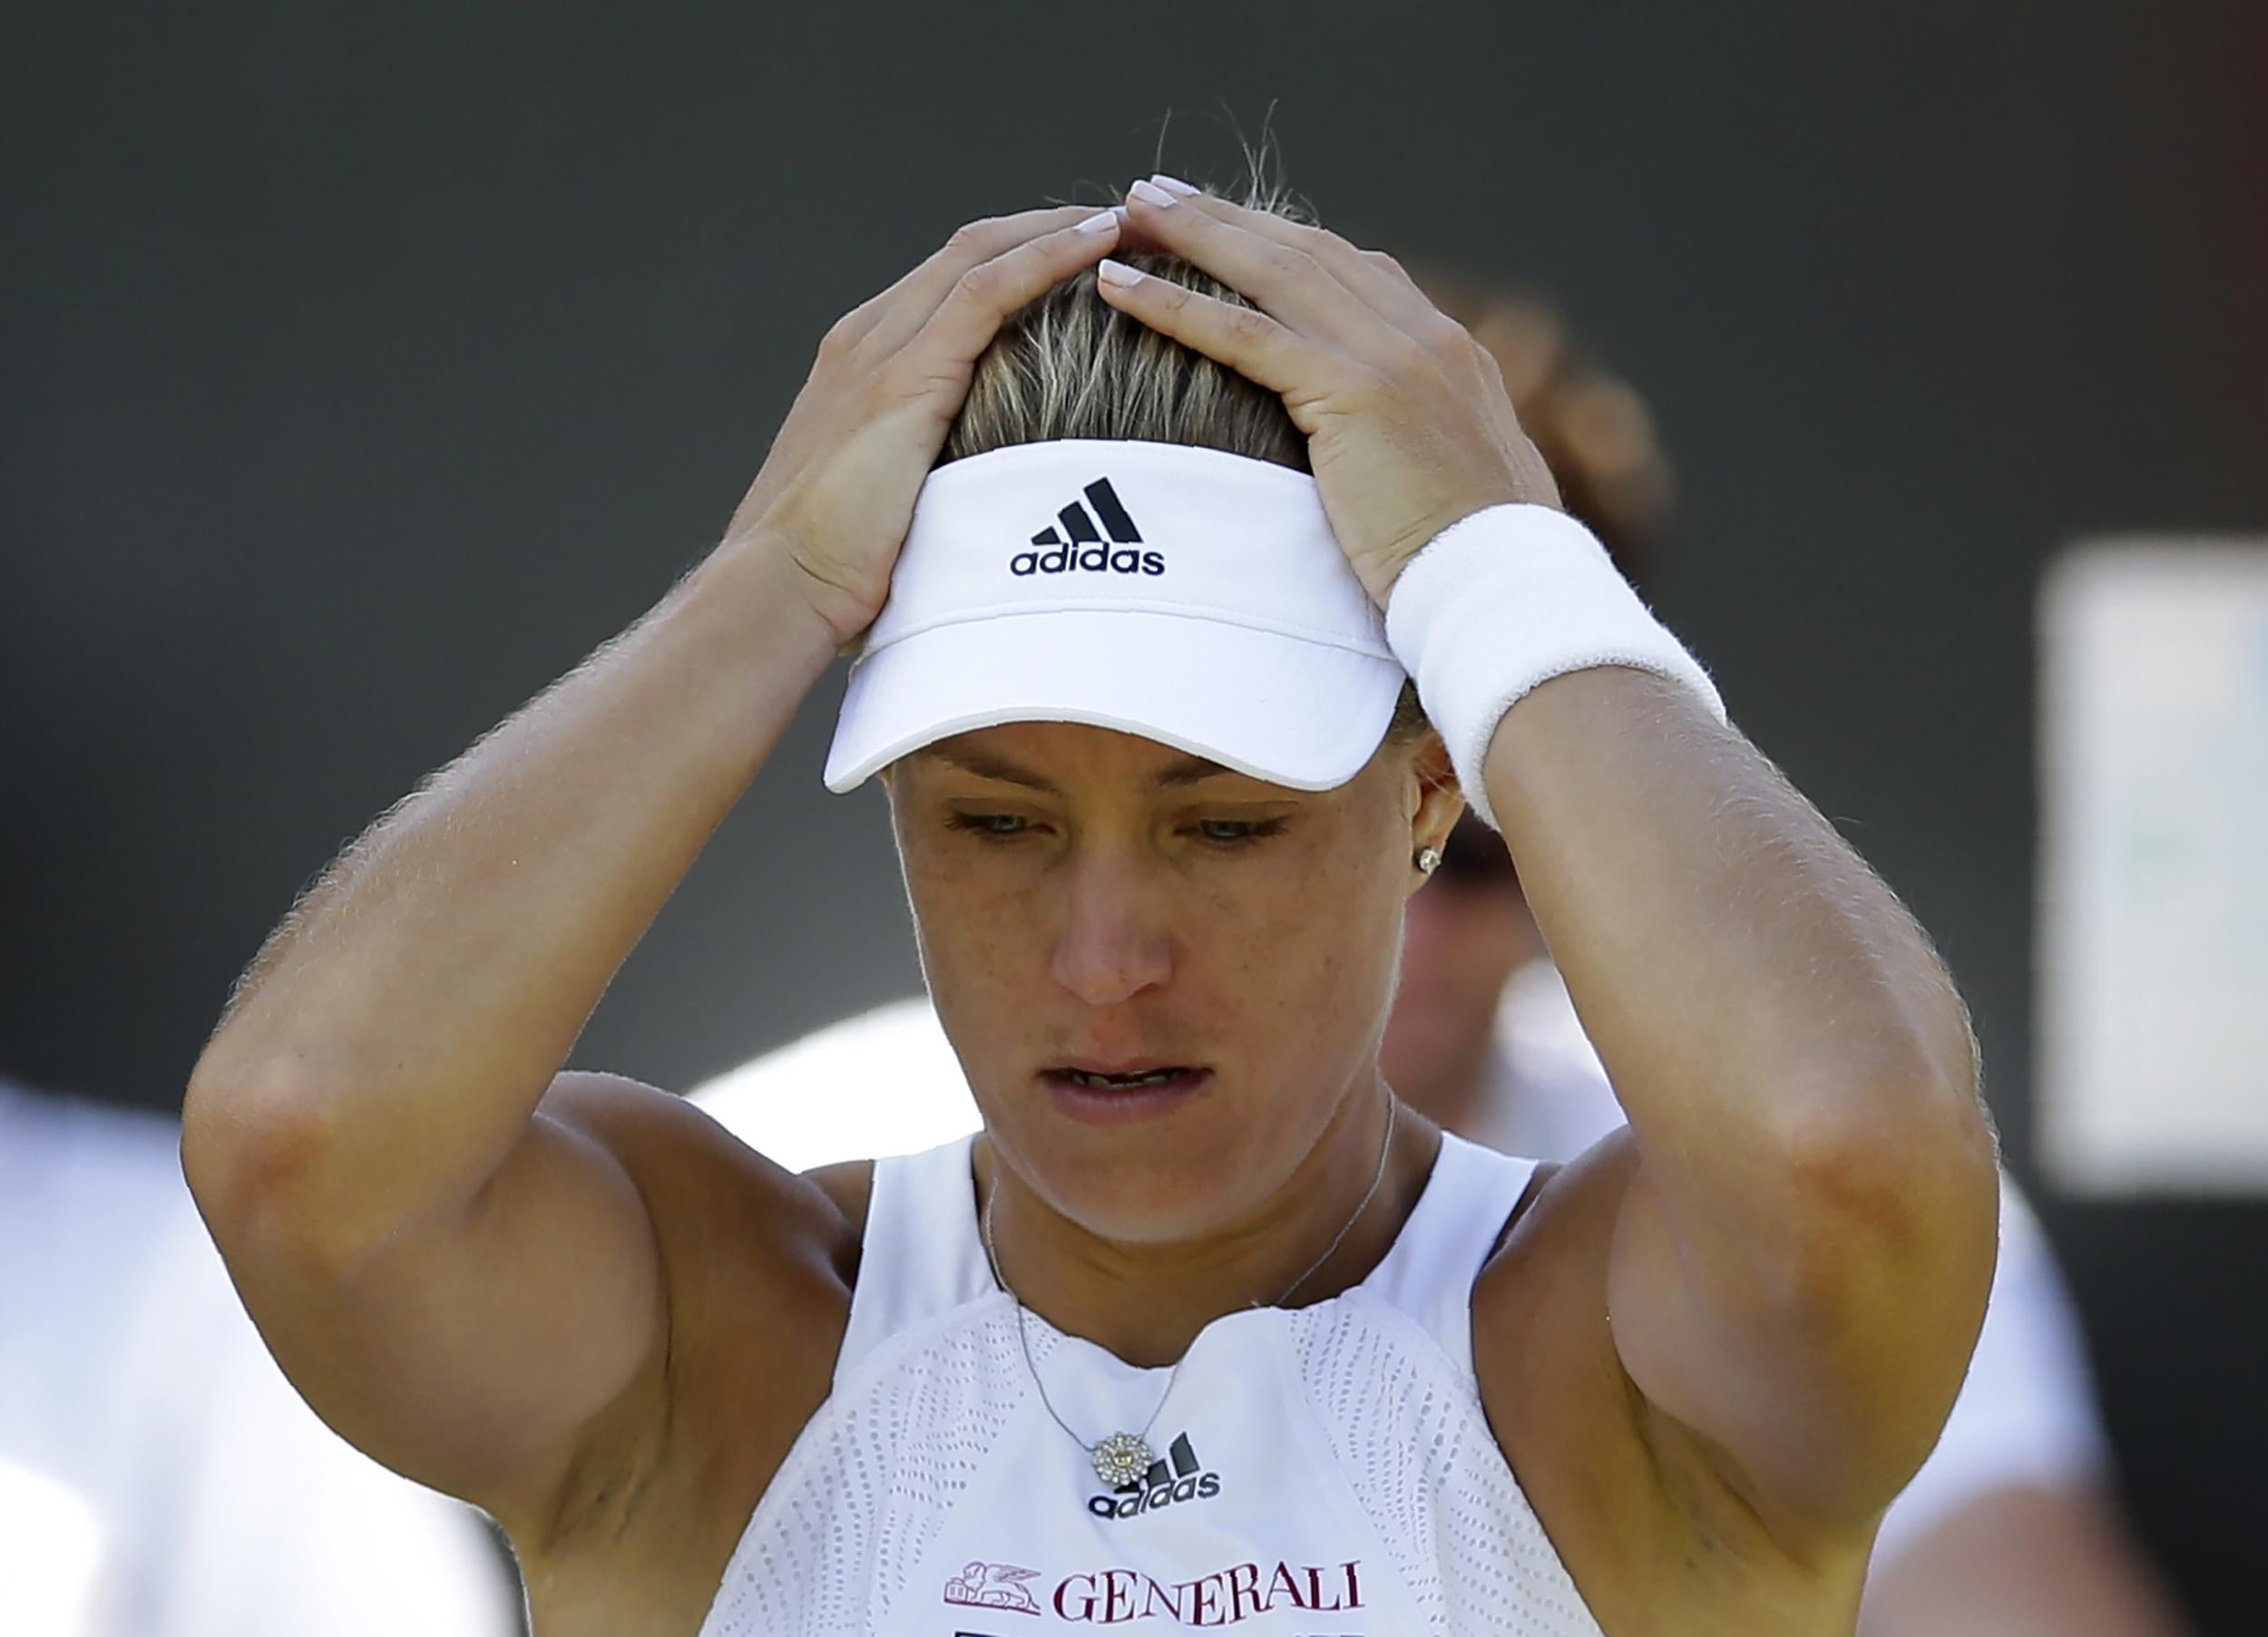 World No 1 Kerber played away from the spotlight's glare